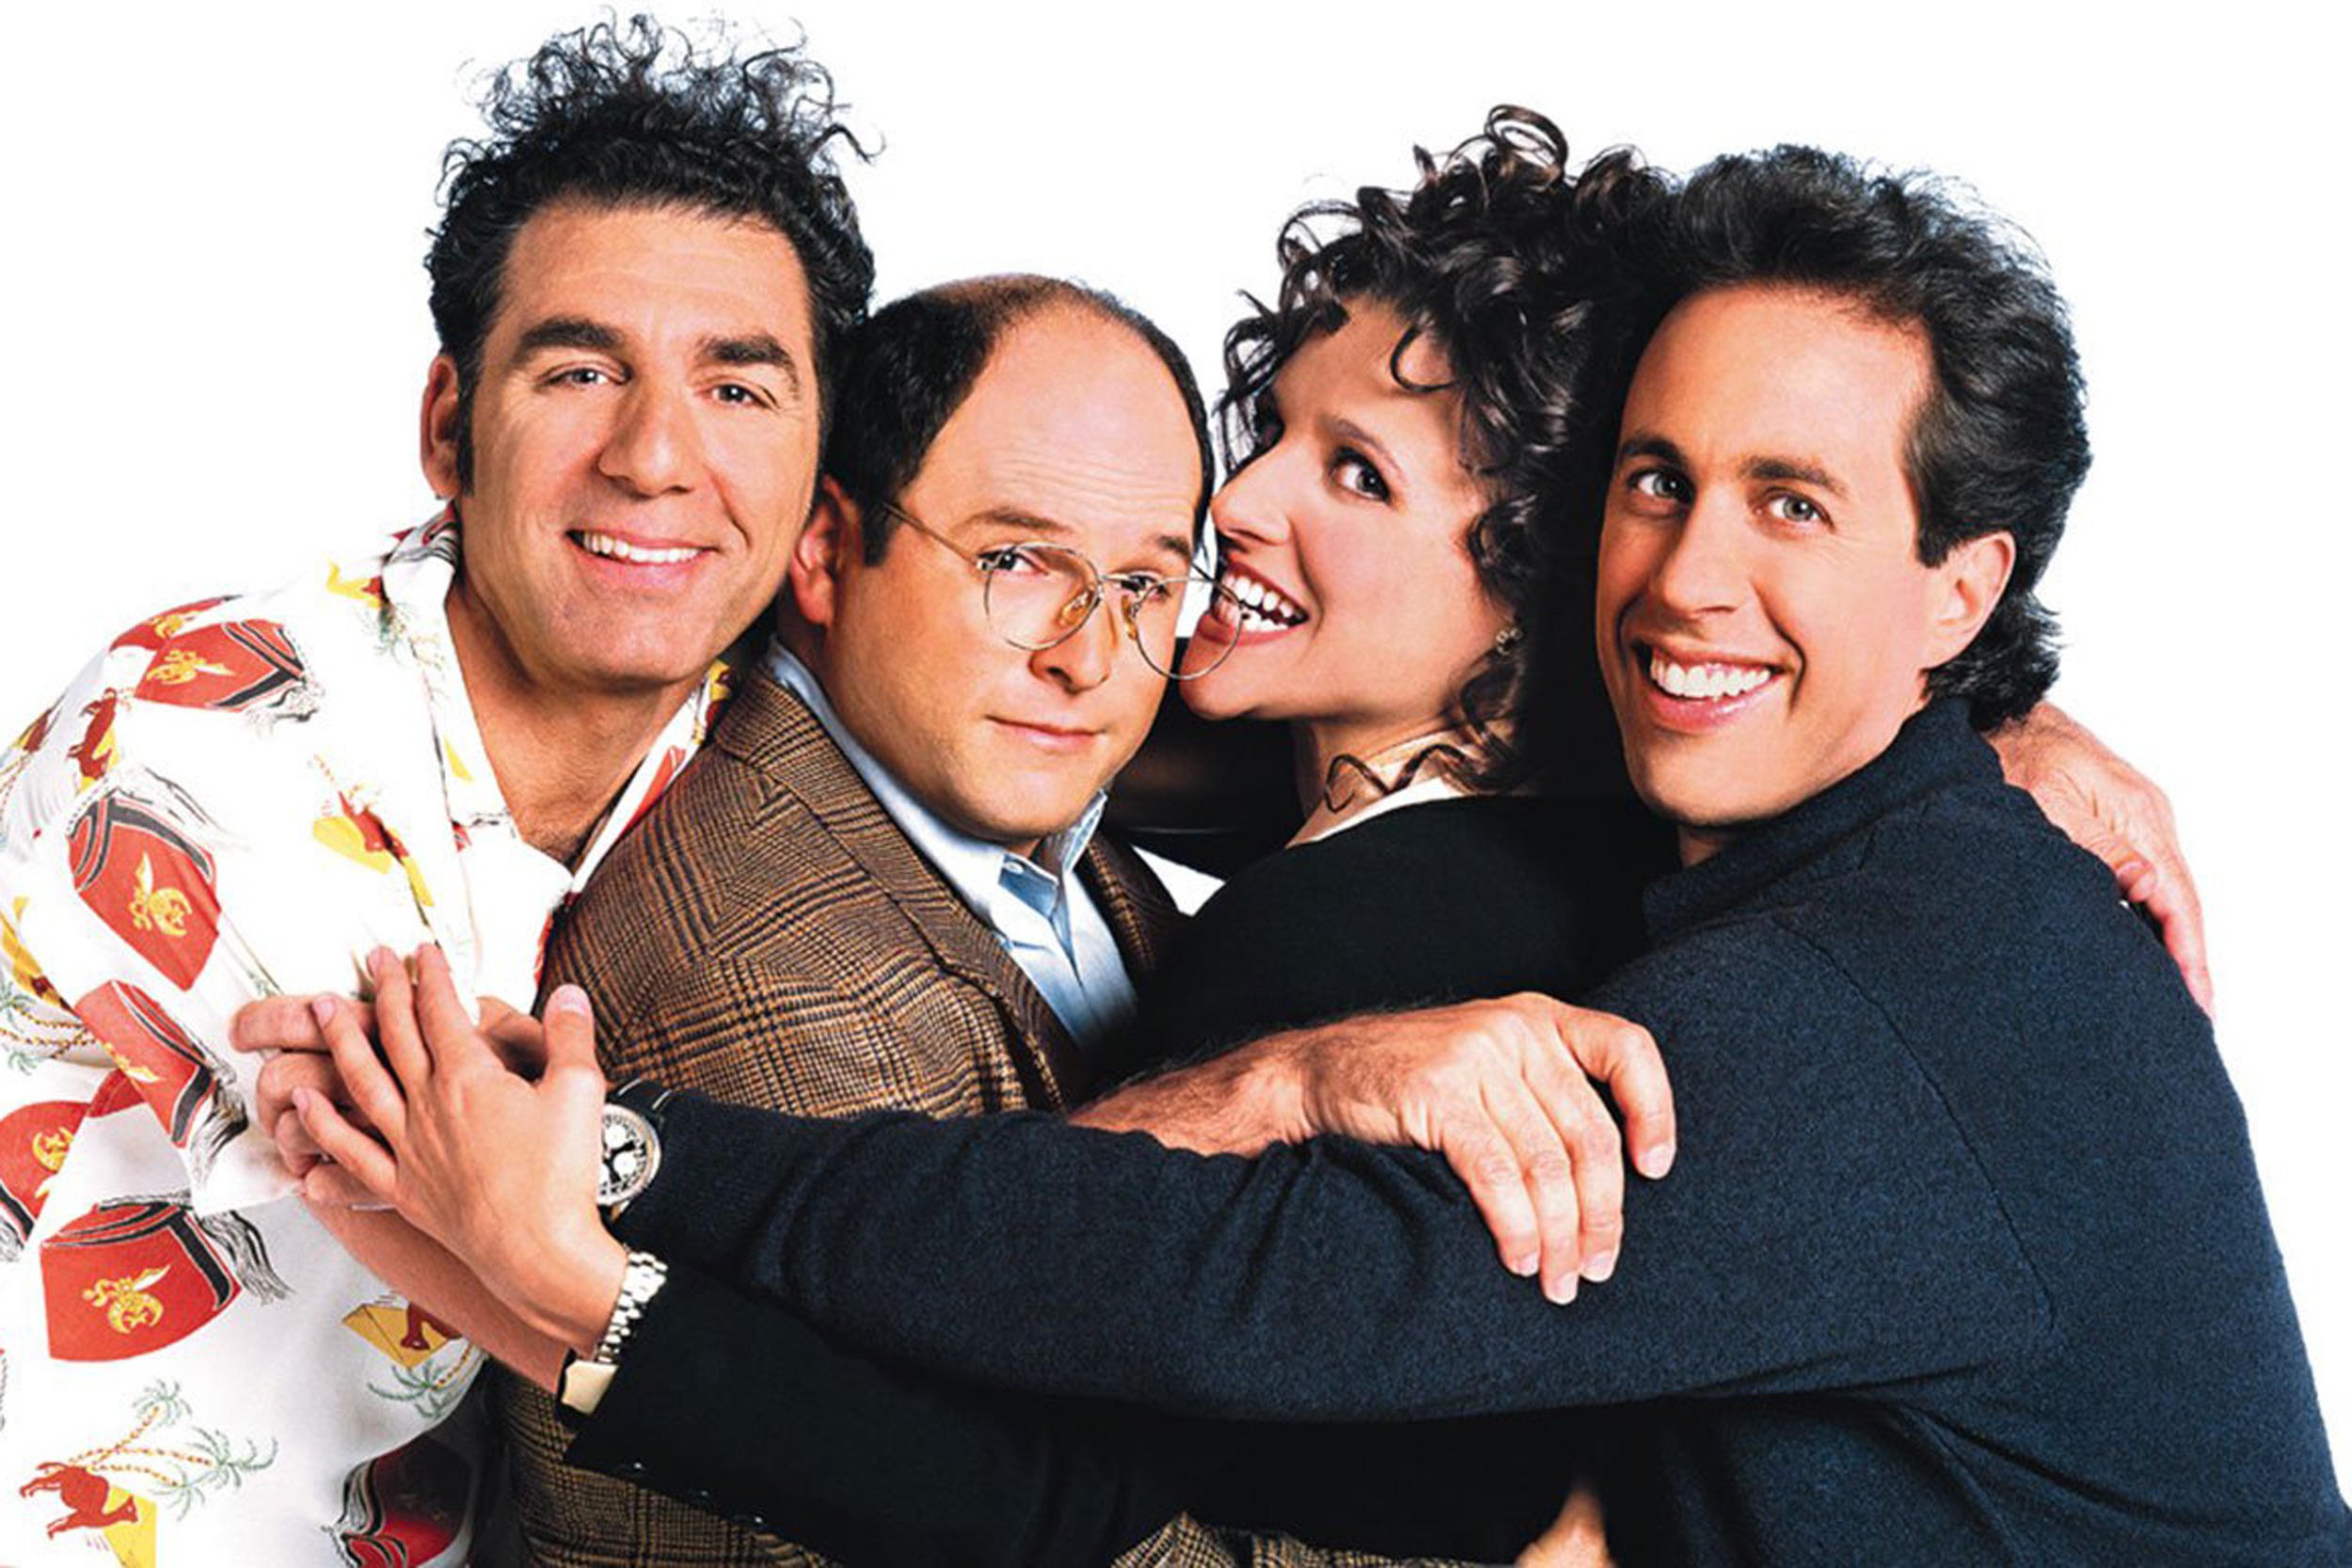 Seinfeld - This show about nothing, about four neurotic New Yorkers, and all their troubles had people tuning in week after week. If you missed an episode one week and came to school hearing people scream out "Soup Nazi!" and "Shrinkage!" you would have no idea what they were talking about. 